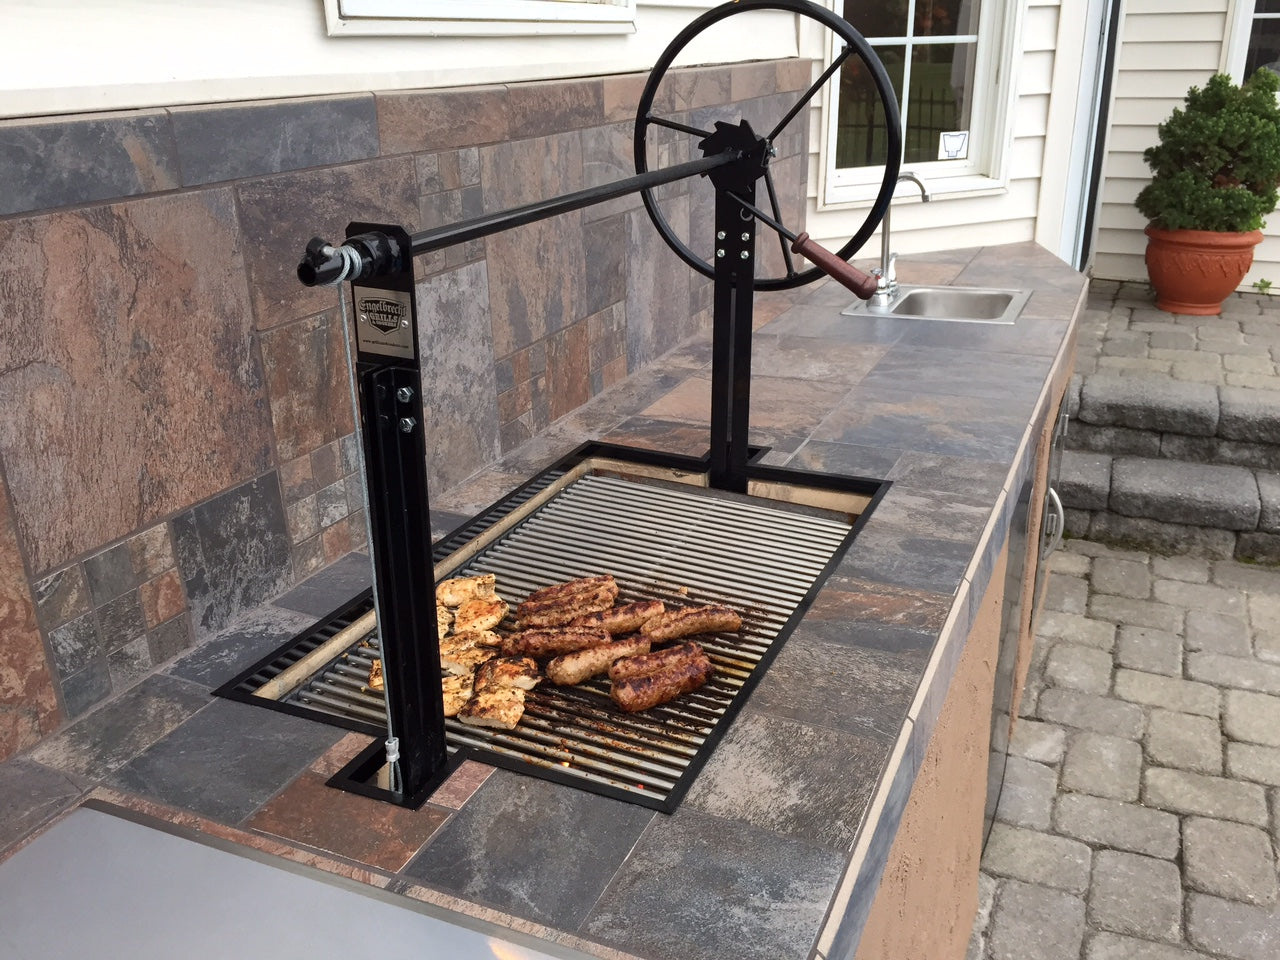 Engelbrecht Grills and Cookers 2000 Series Stahlkammer Grill Review